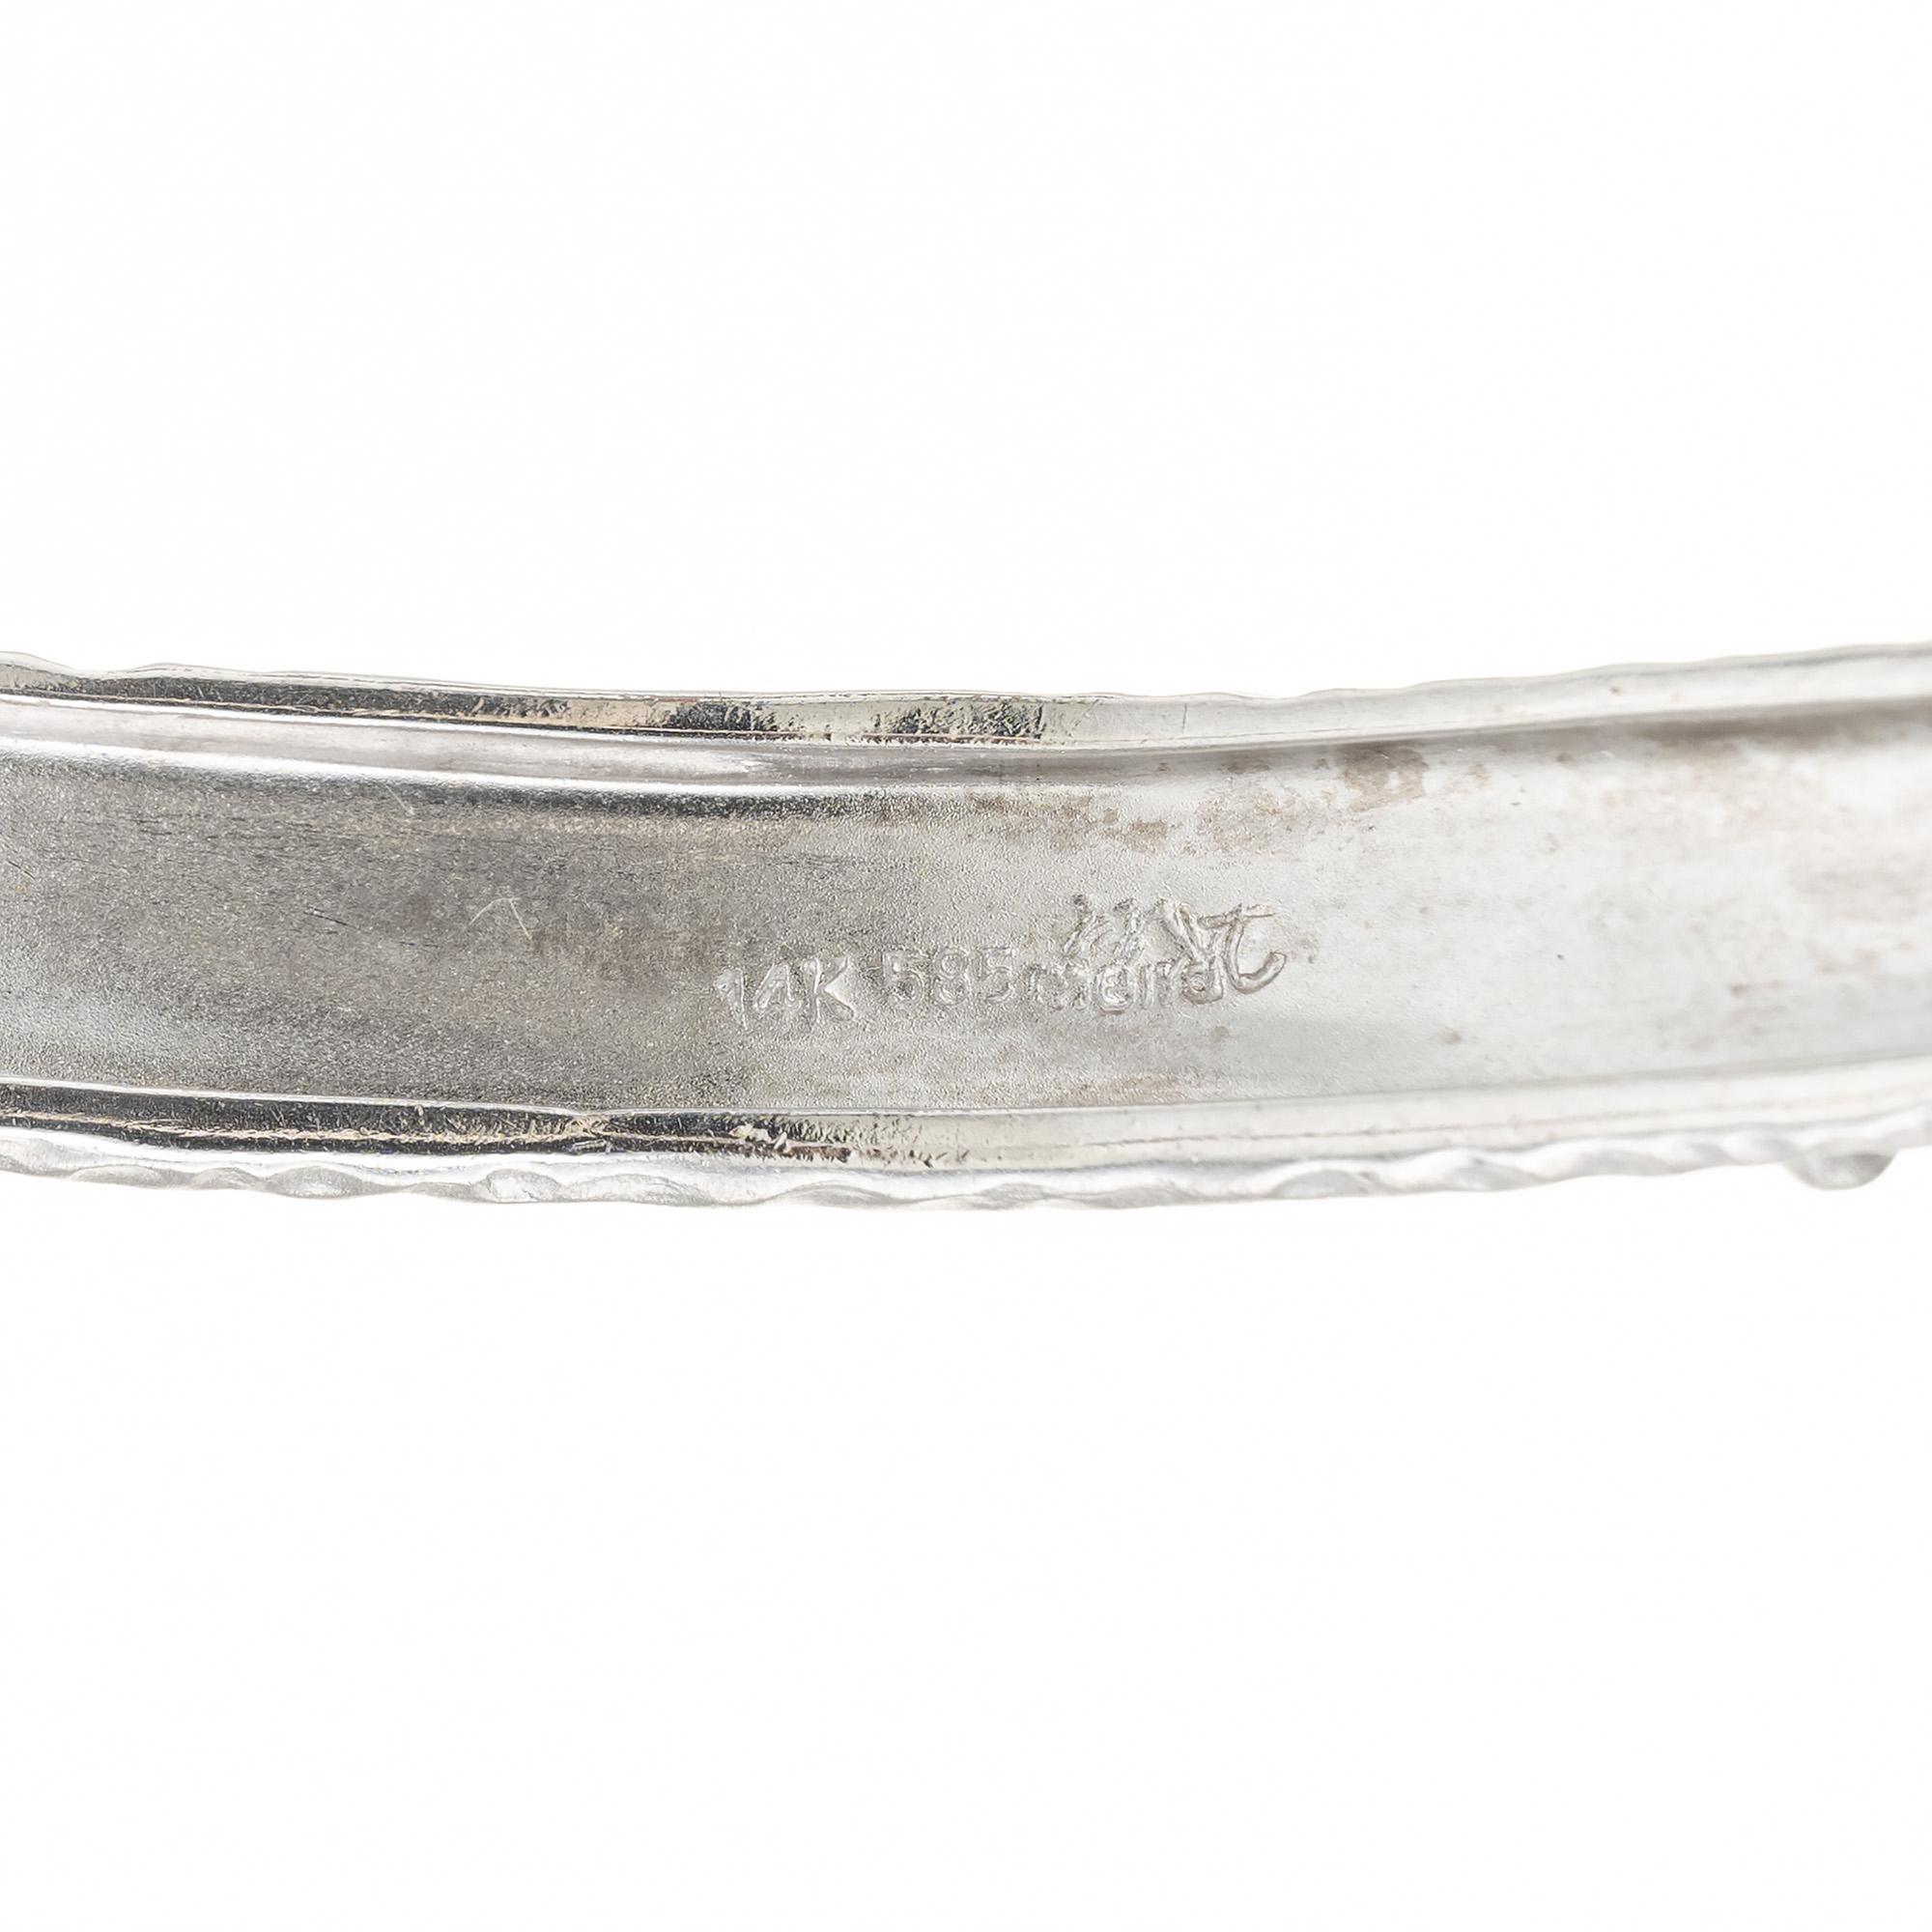 Miera T .8 Carat Diamond White Gold Slip on Bangle Bracelet In Good Condition For Sale In Stamford, CT